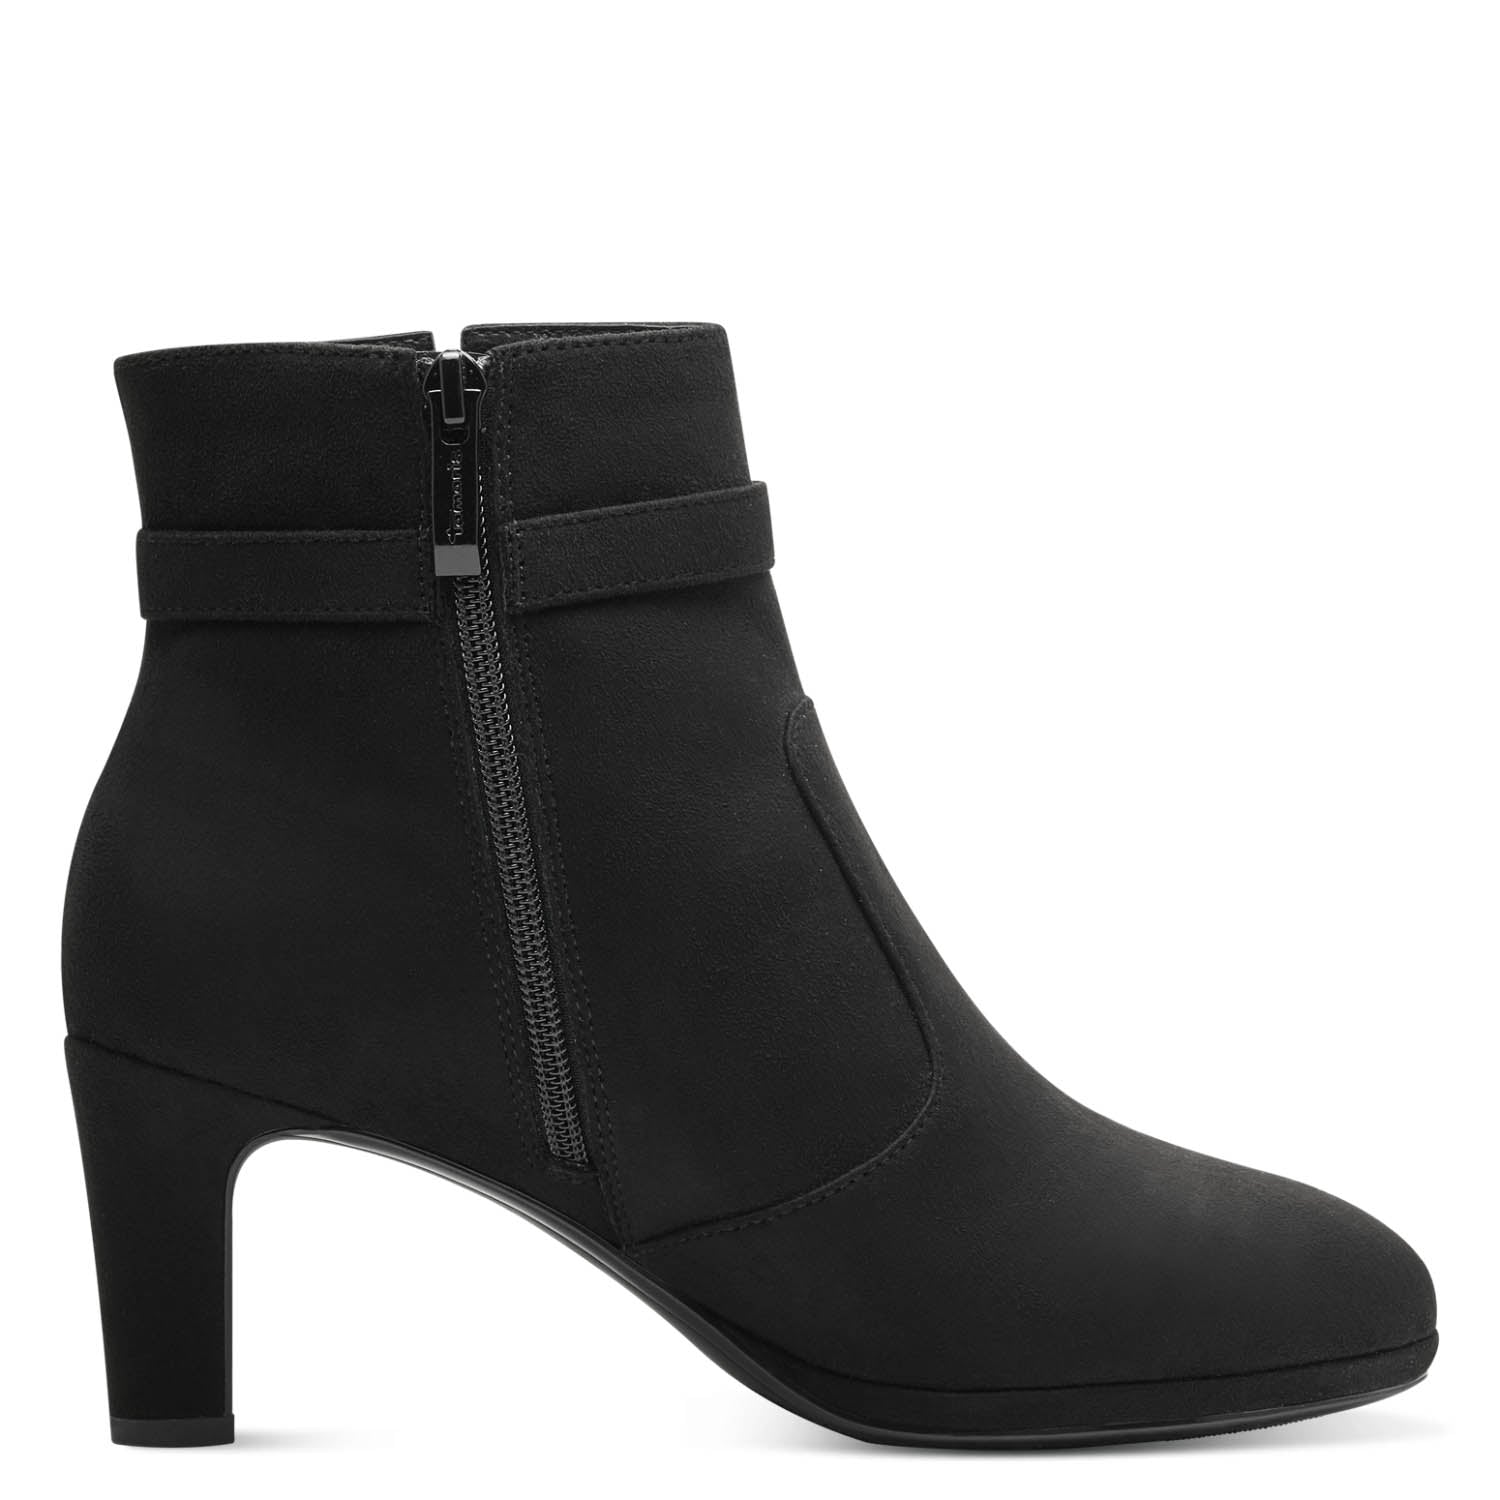 Side view displaying the interior and zipper of the Tamaris Black Dressy Ankle Boot.